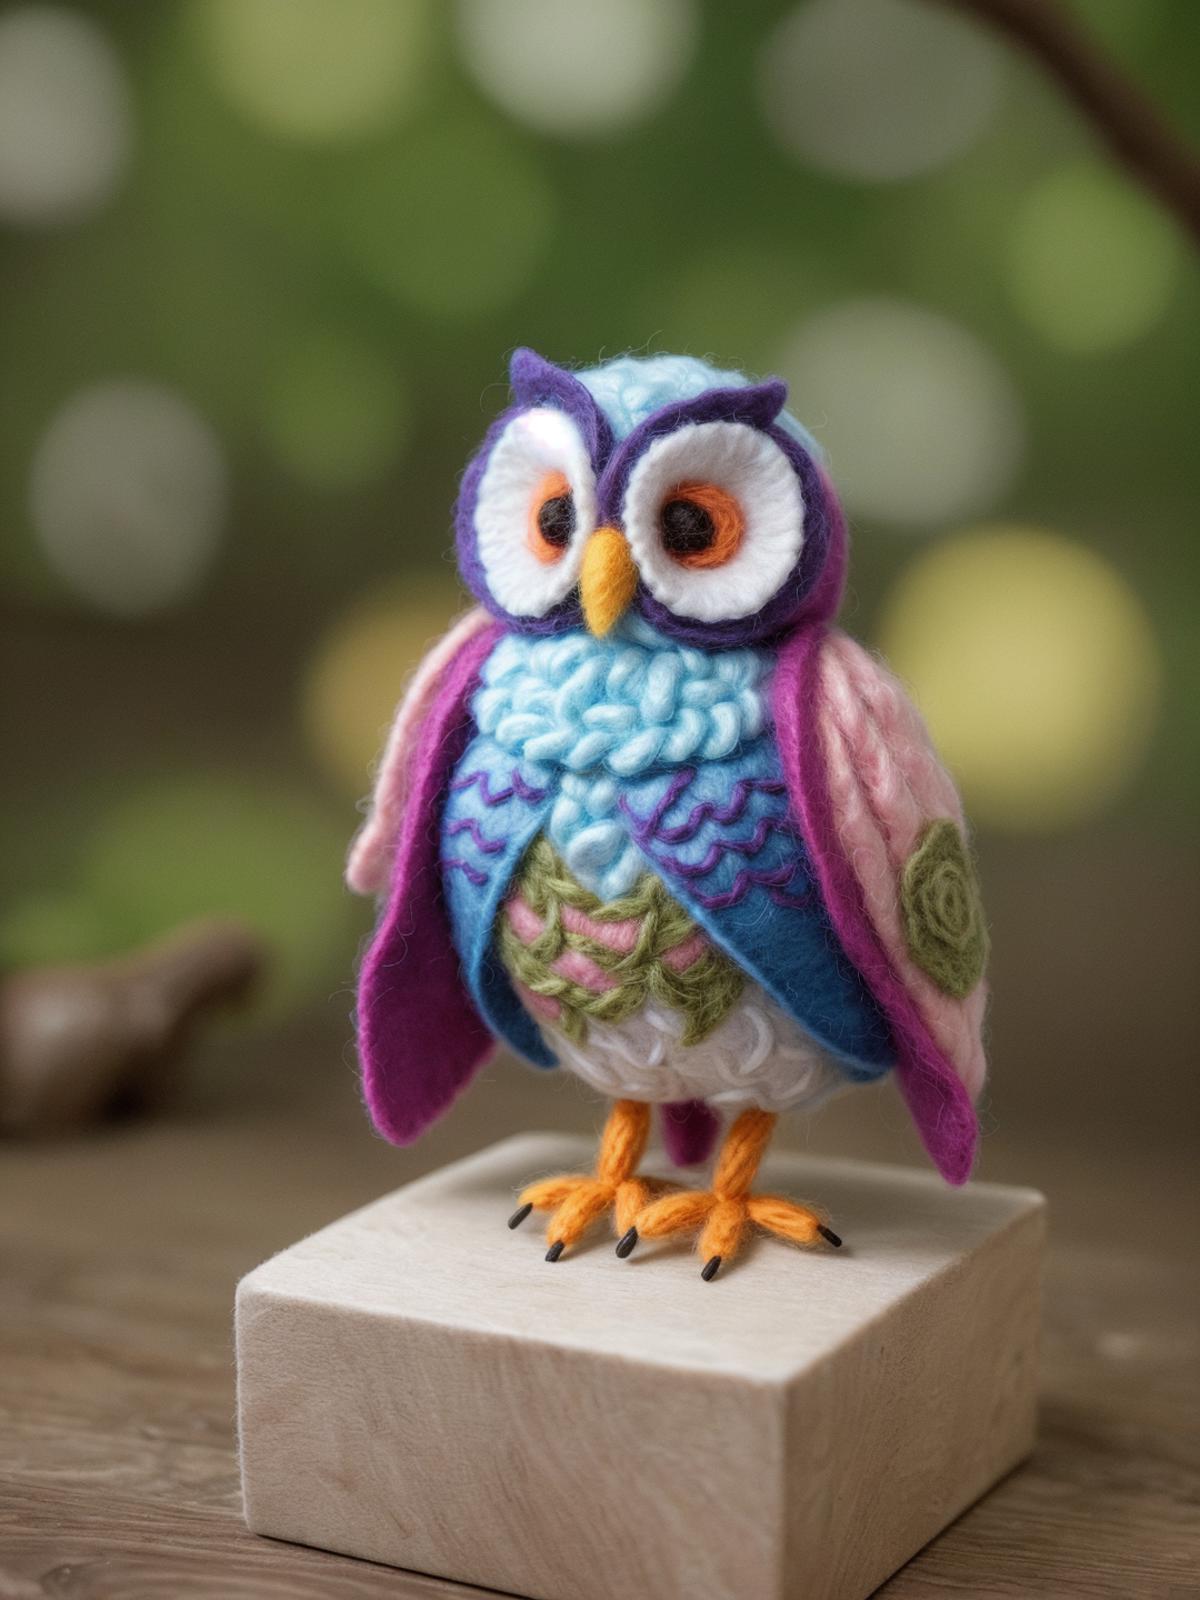 A small stuffed owl with purple wings and a white belly.